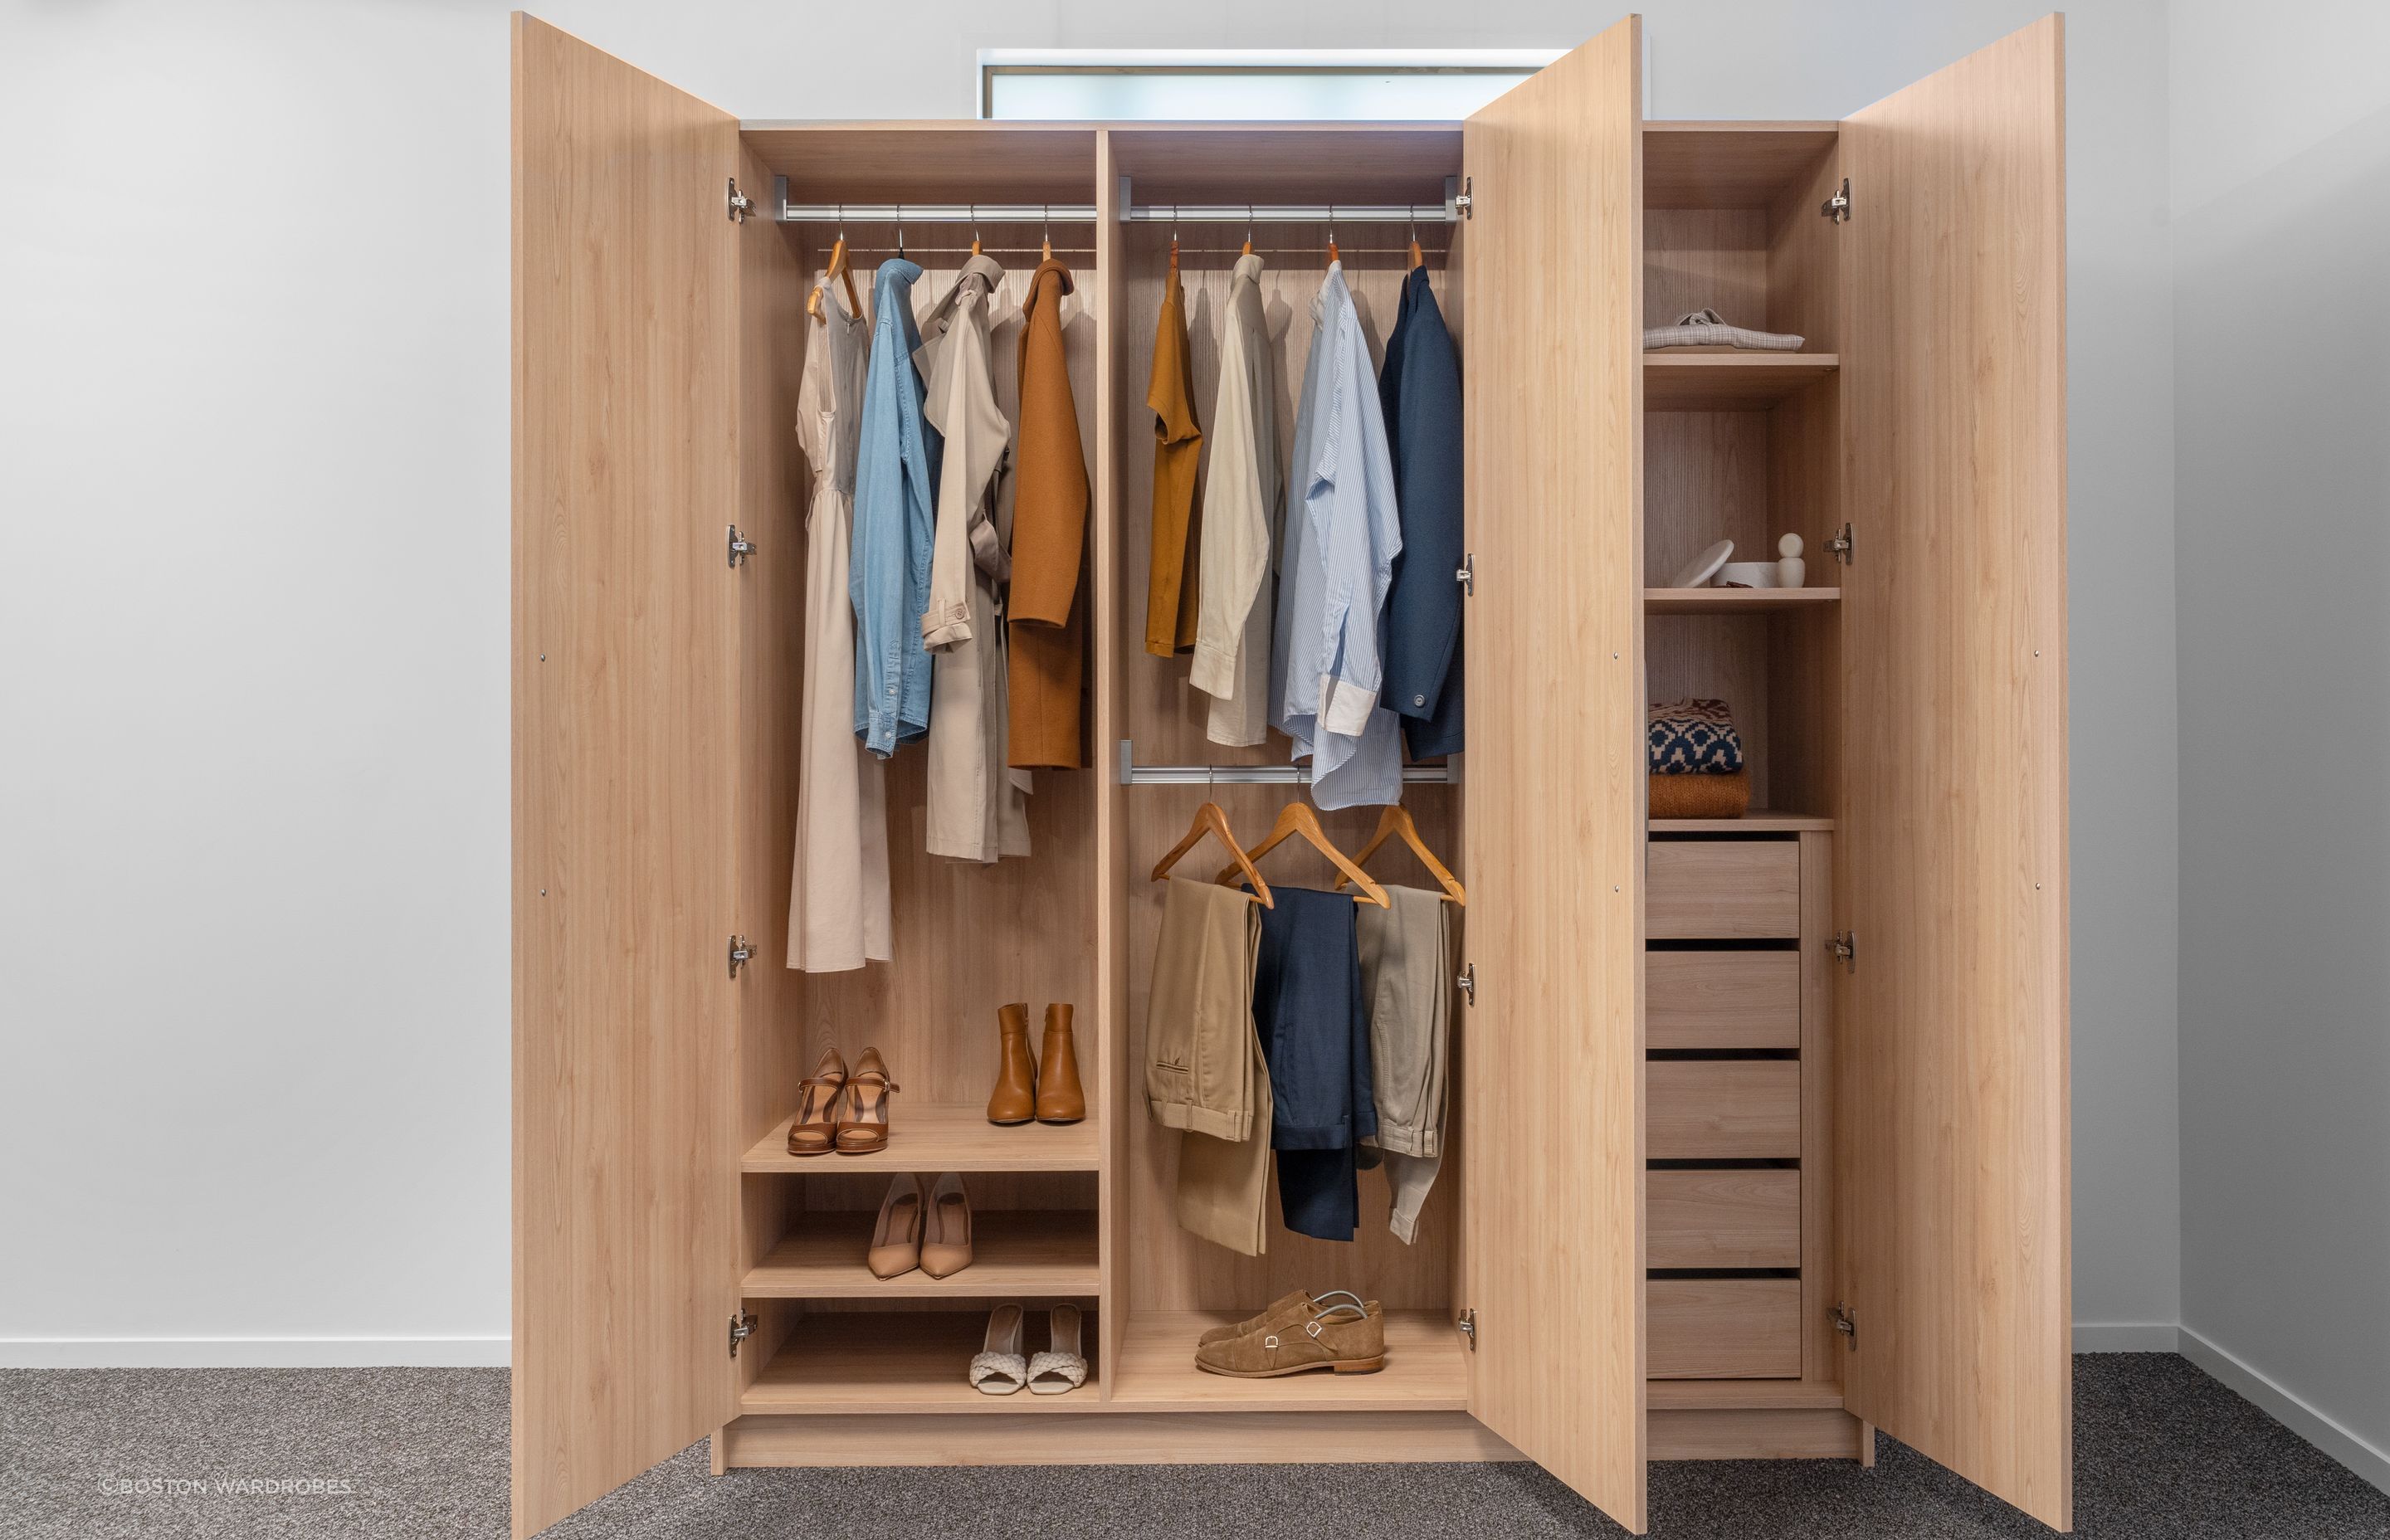 Viva is designed for homes that don’t have in-built wardrobe space. The premium, freestanding unit is complete with back panels and doors, and can be installed by the Boston Wardrobes’ team with minimal preparatory work. 